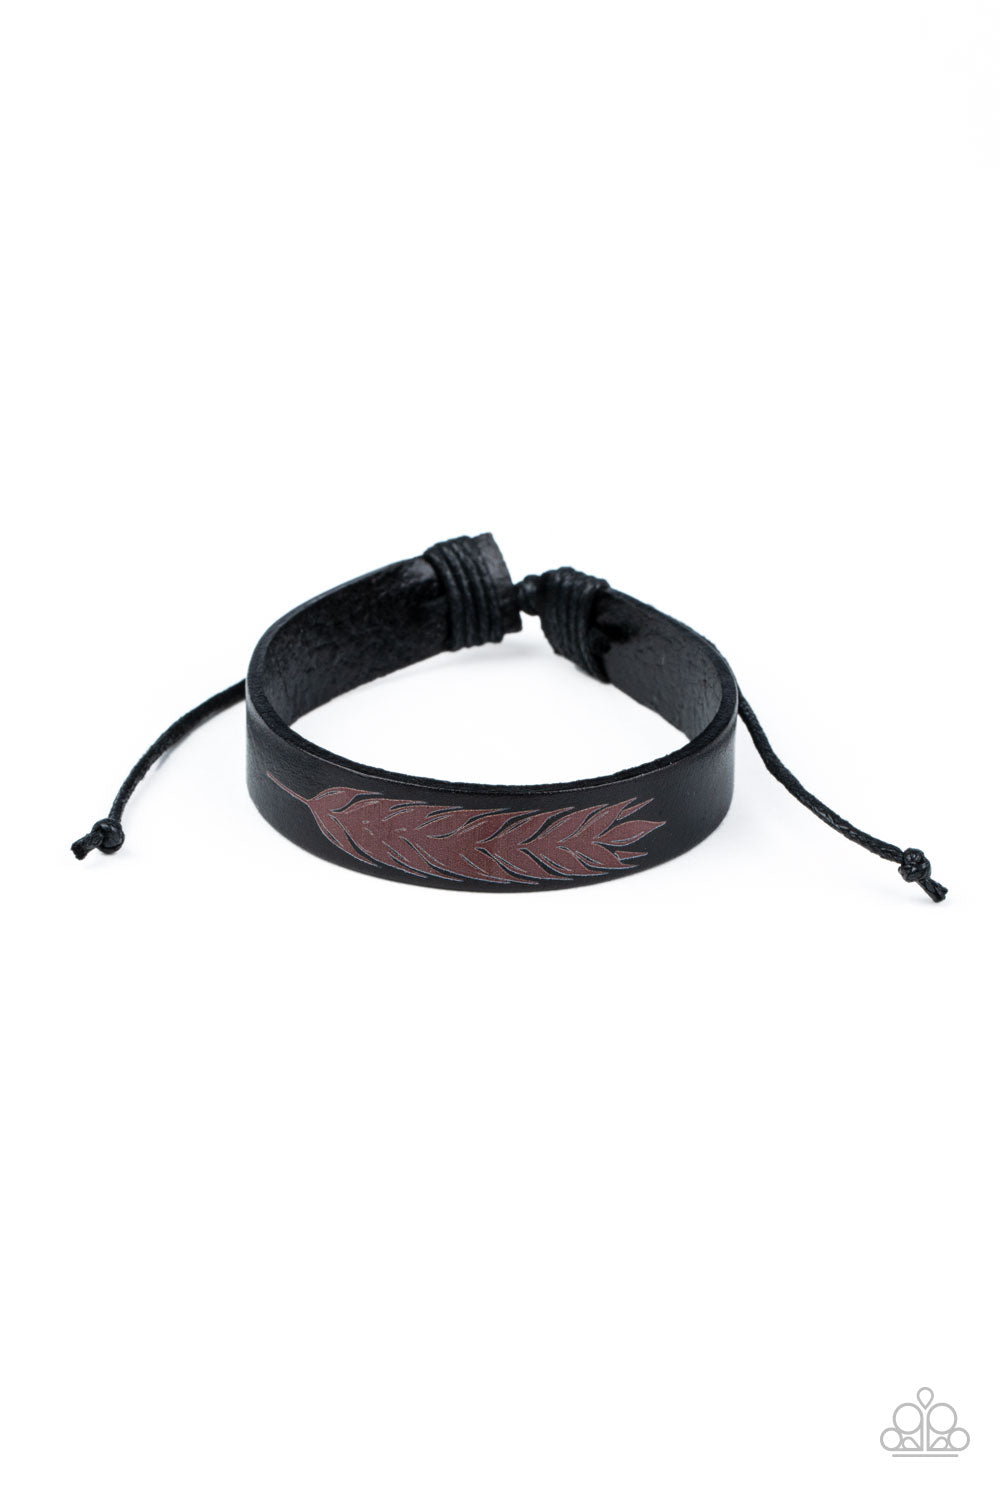 This QUILL All Be Yours Black Bracelet